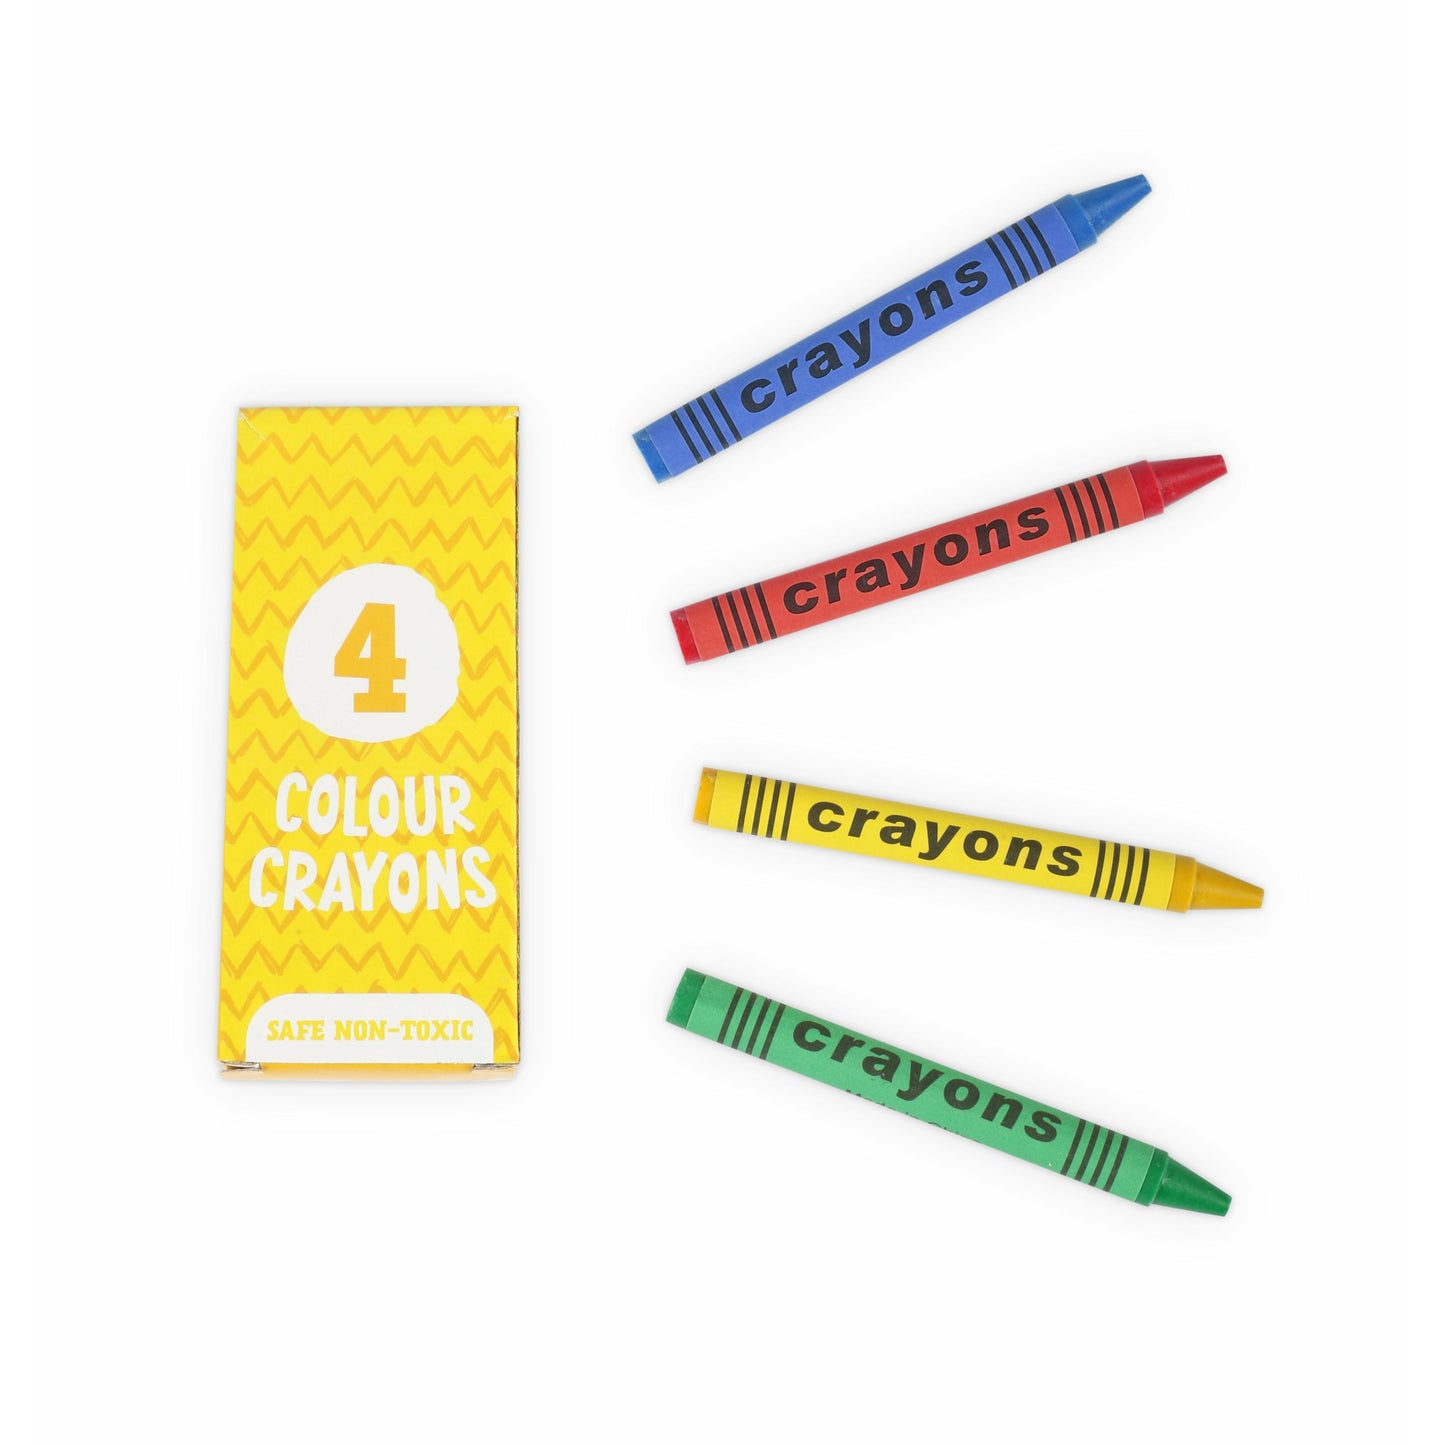 Pack of 10 Boxes of 4 Wax Crayons - 40 Crayons